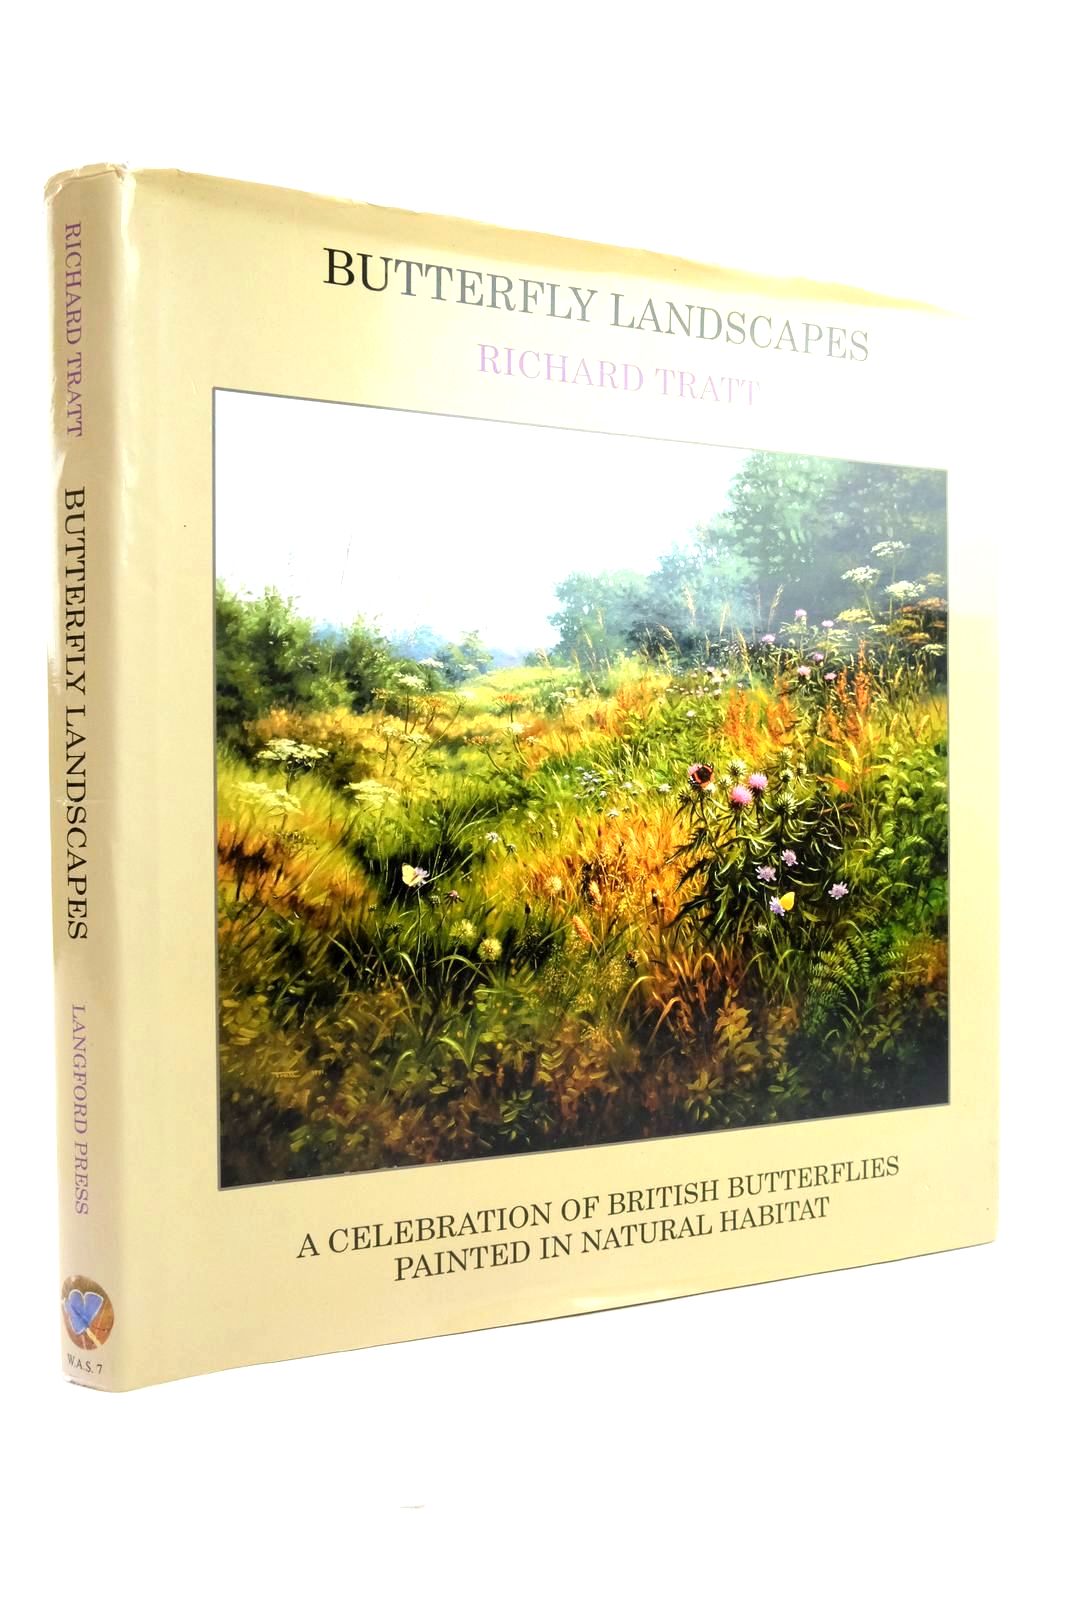 Photo of BUTTERFLY LANDSCAPES written by Tratt, Richard illustrated by Tratt, Richard published by Langford Press (STOCK CODE: 2136506)  for sale by Stella & Rose's Books